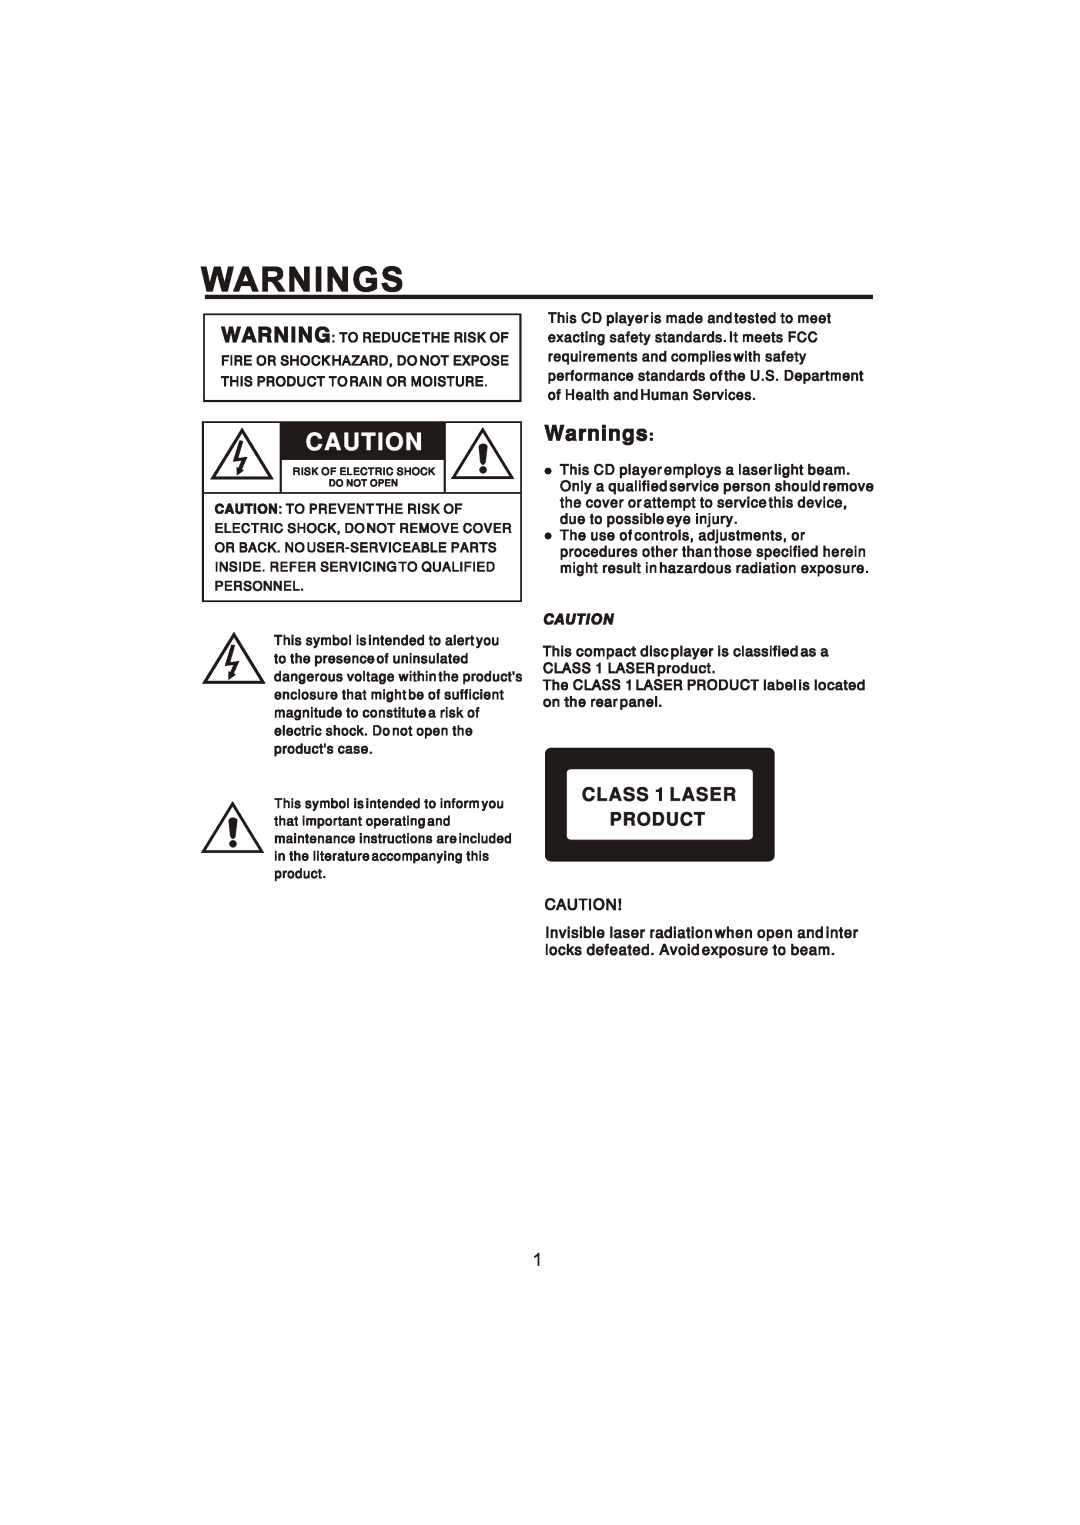 The Singing Machine STVG-700 manual Warnings, Product, CLASS 1 LASER 